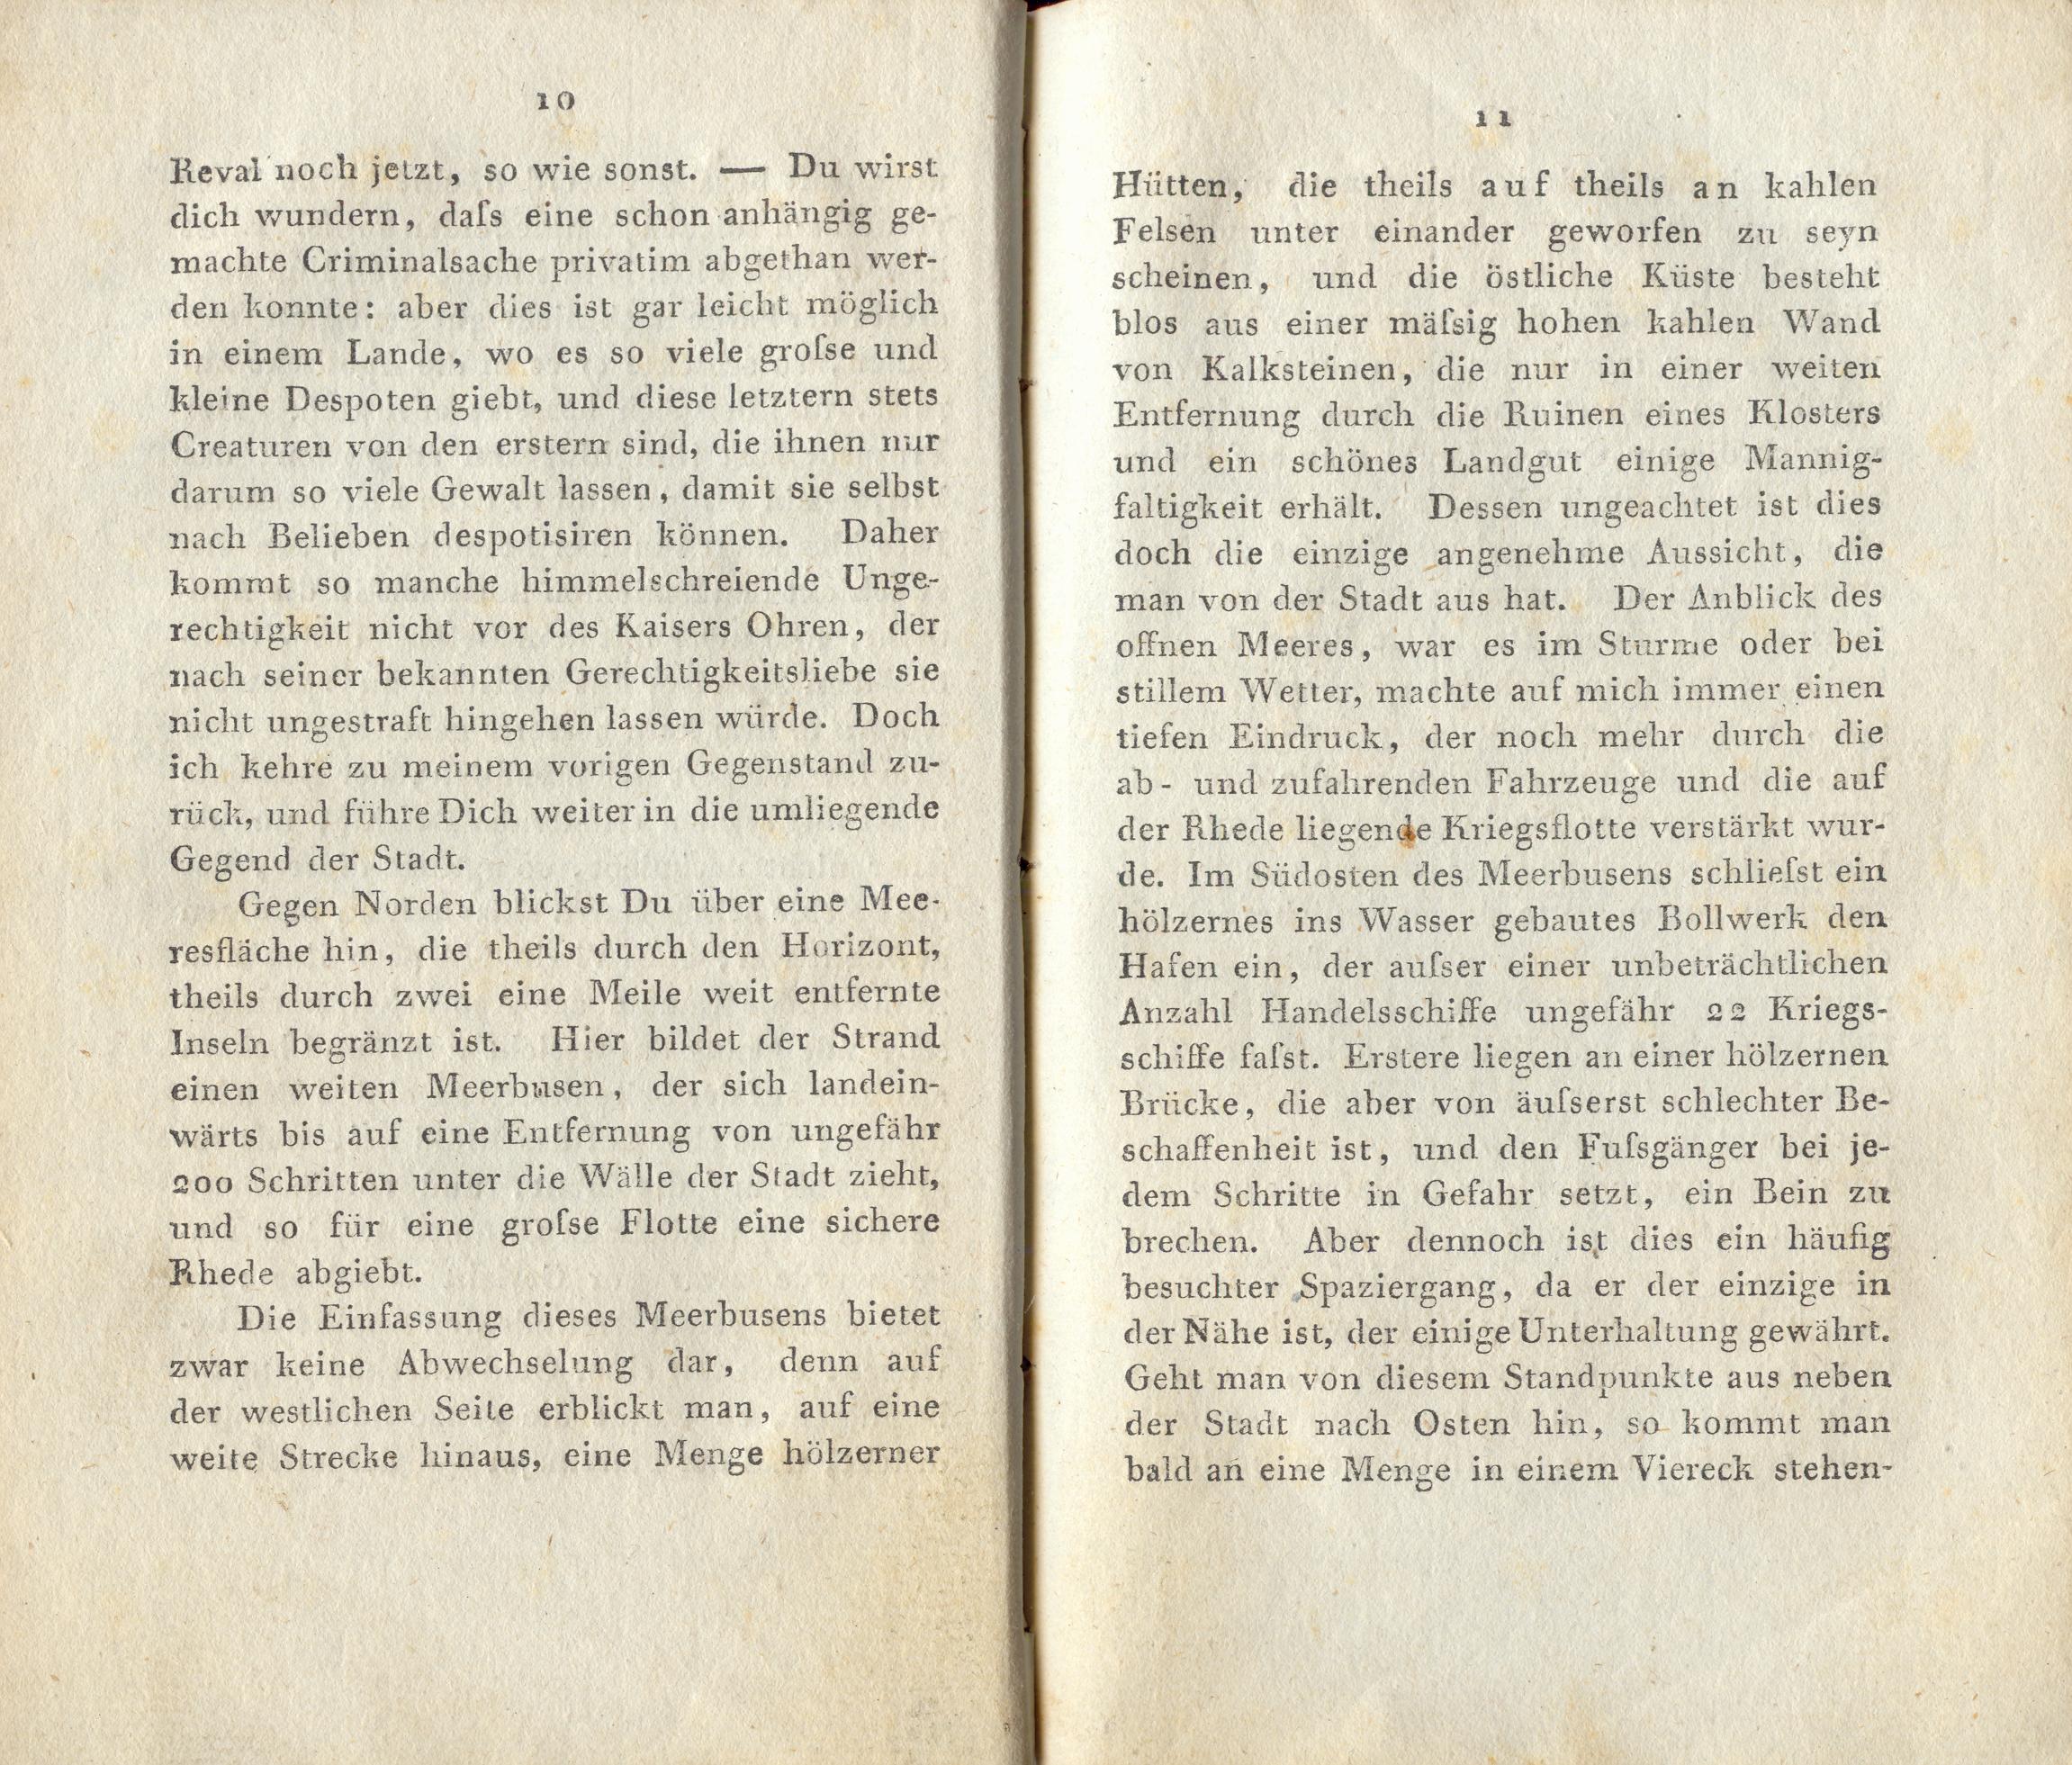 Briefe über Reval (1800) | 6. (10-11) Main body of text